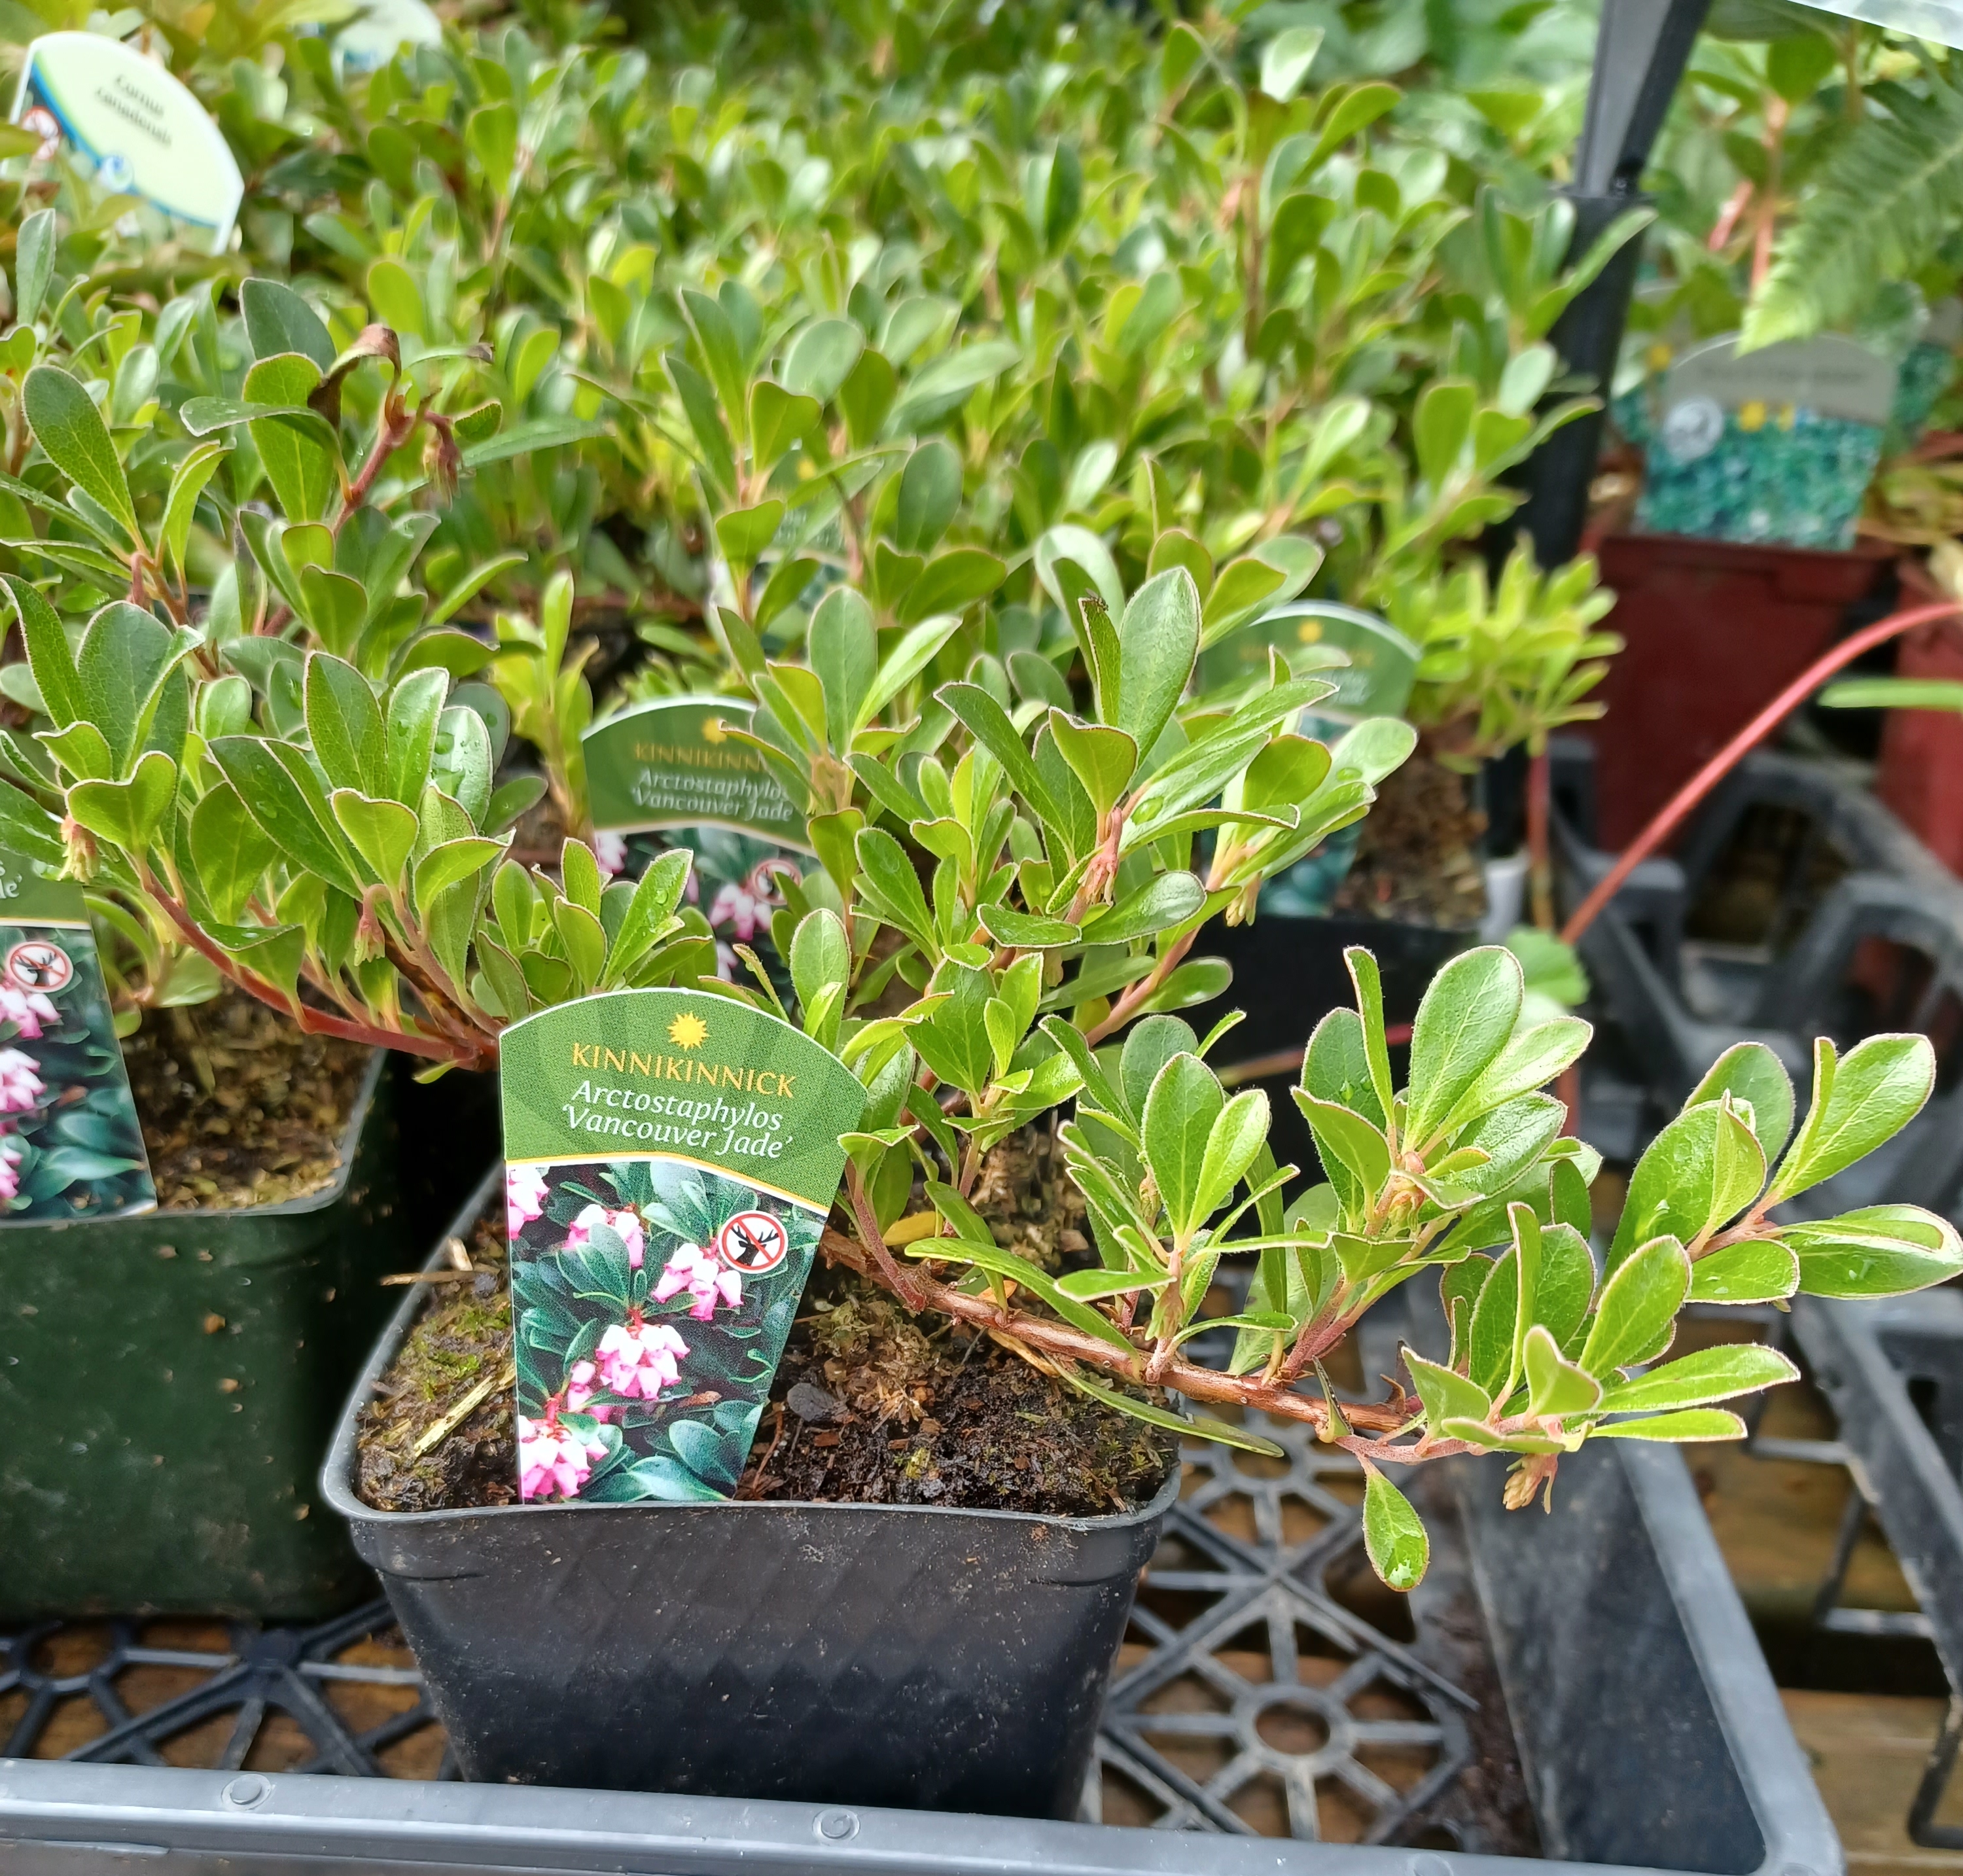 Arctostaphylos uva-ursi 'Vancouver Jade' grown in a 4-inch container at a native plant nursery near Seattle, WA.